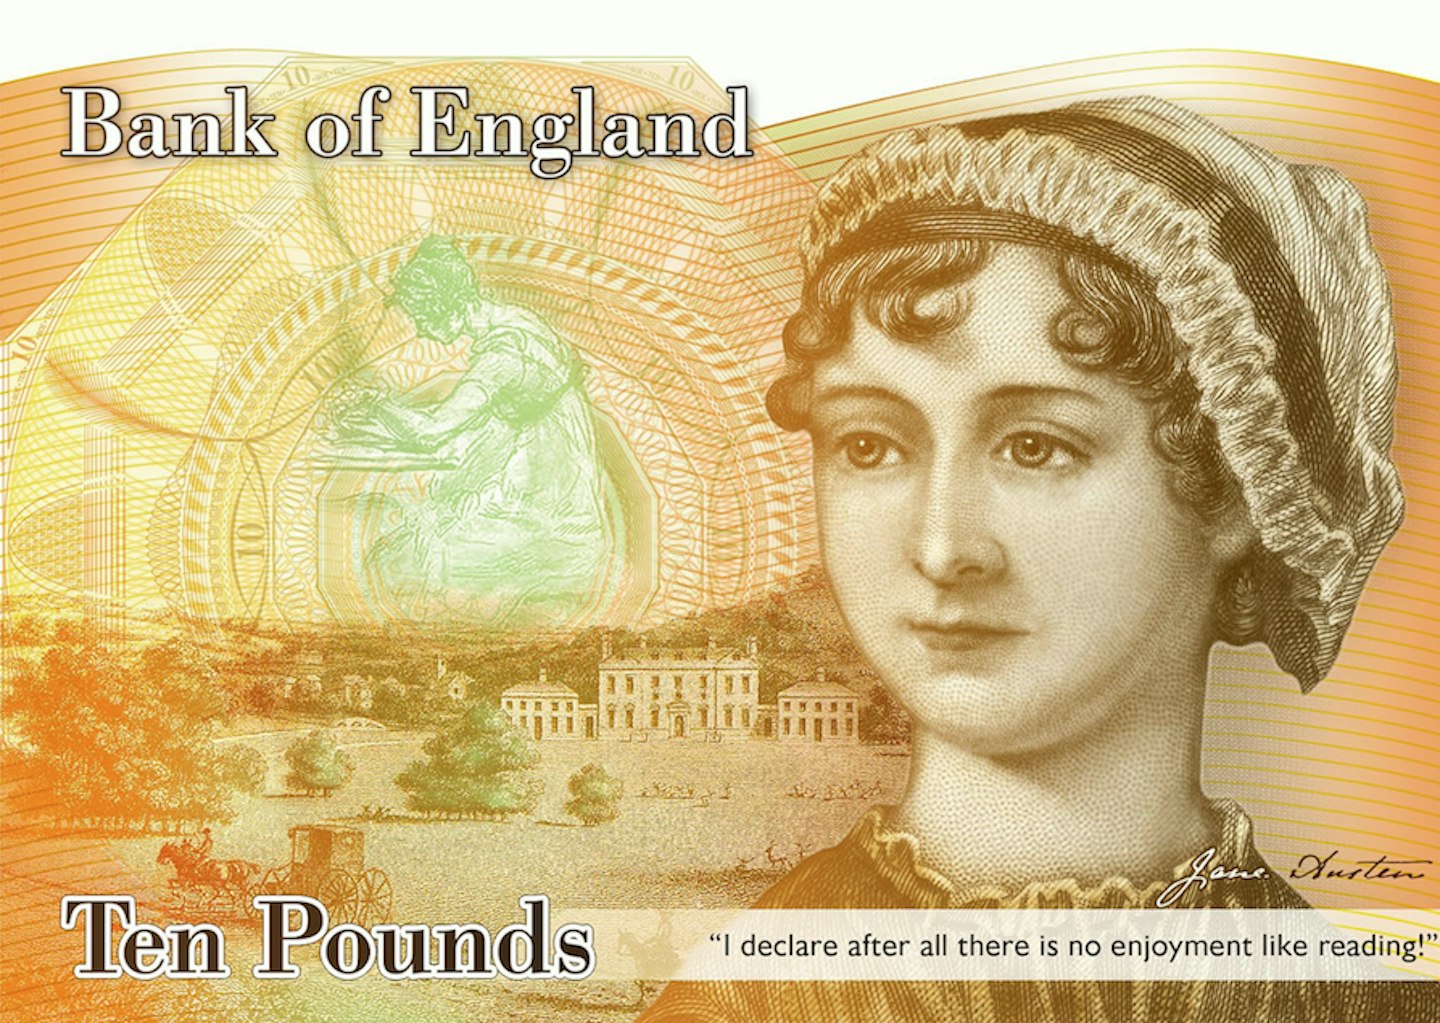 Jane Austen appears as an 'airbrushed' portrait in the new £10 note